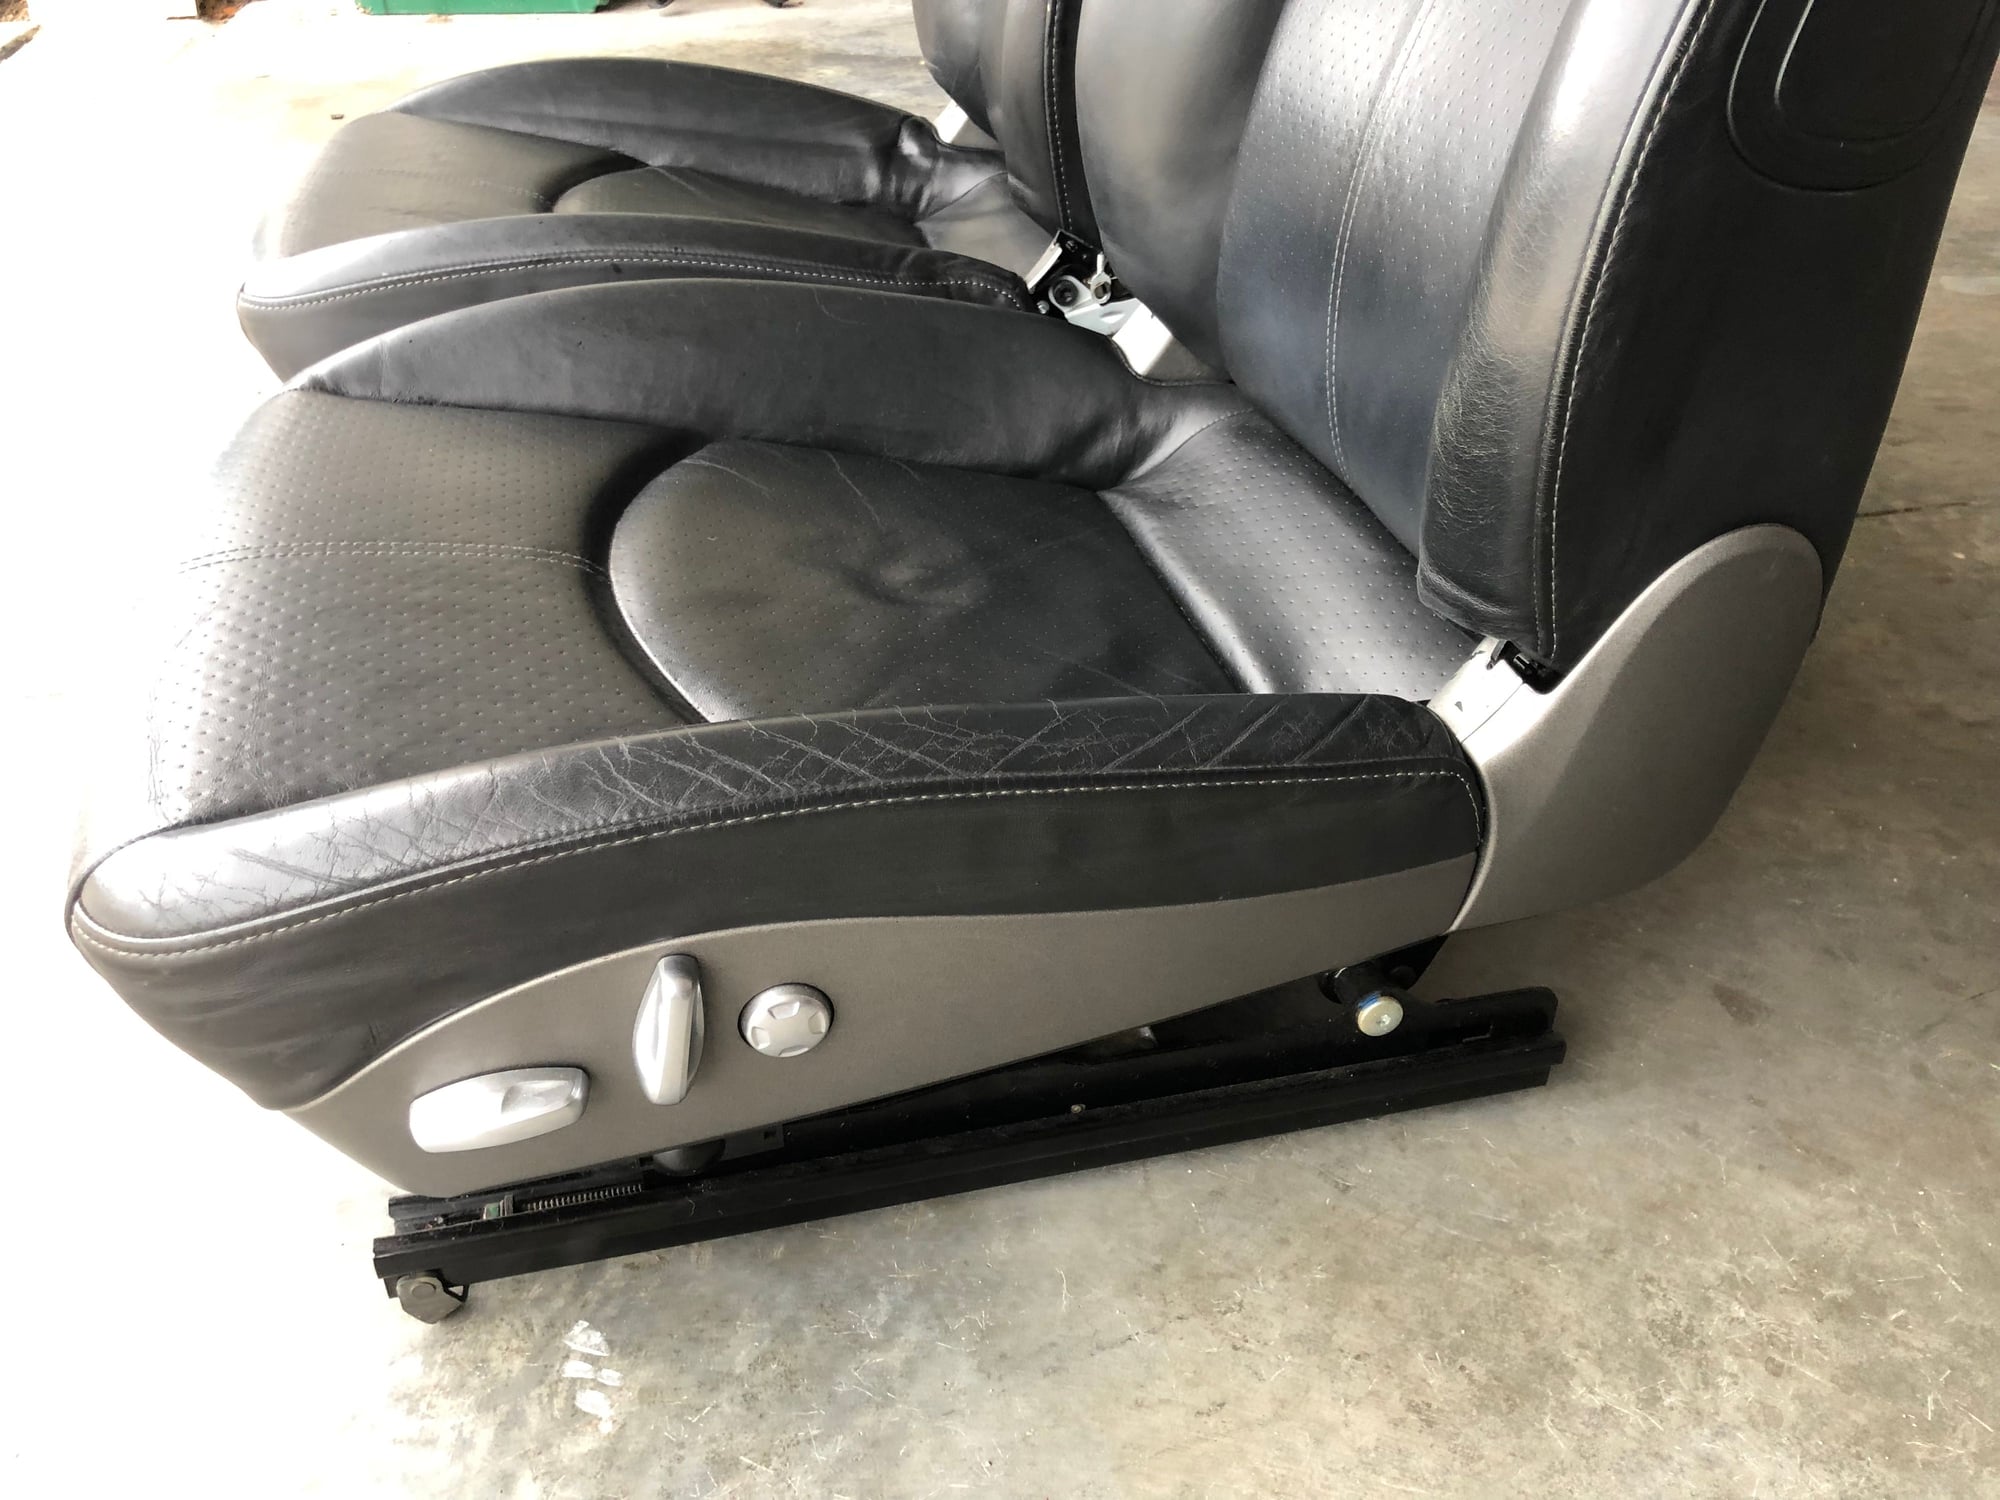 Interior/Upholstery - 997 Turbo power seats - Used - 2007 to 2016 Porsche 911 - 2007 to 2016 Porsche Boxster - Melbourne, FL 32904, United States